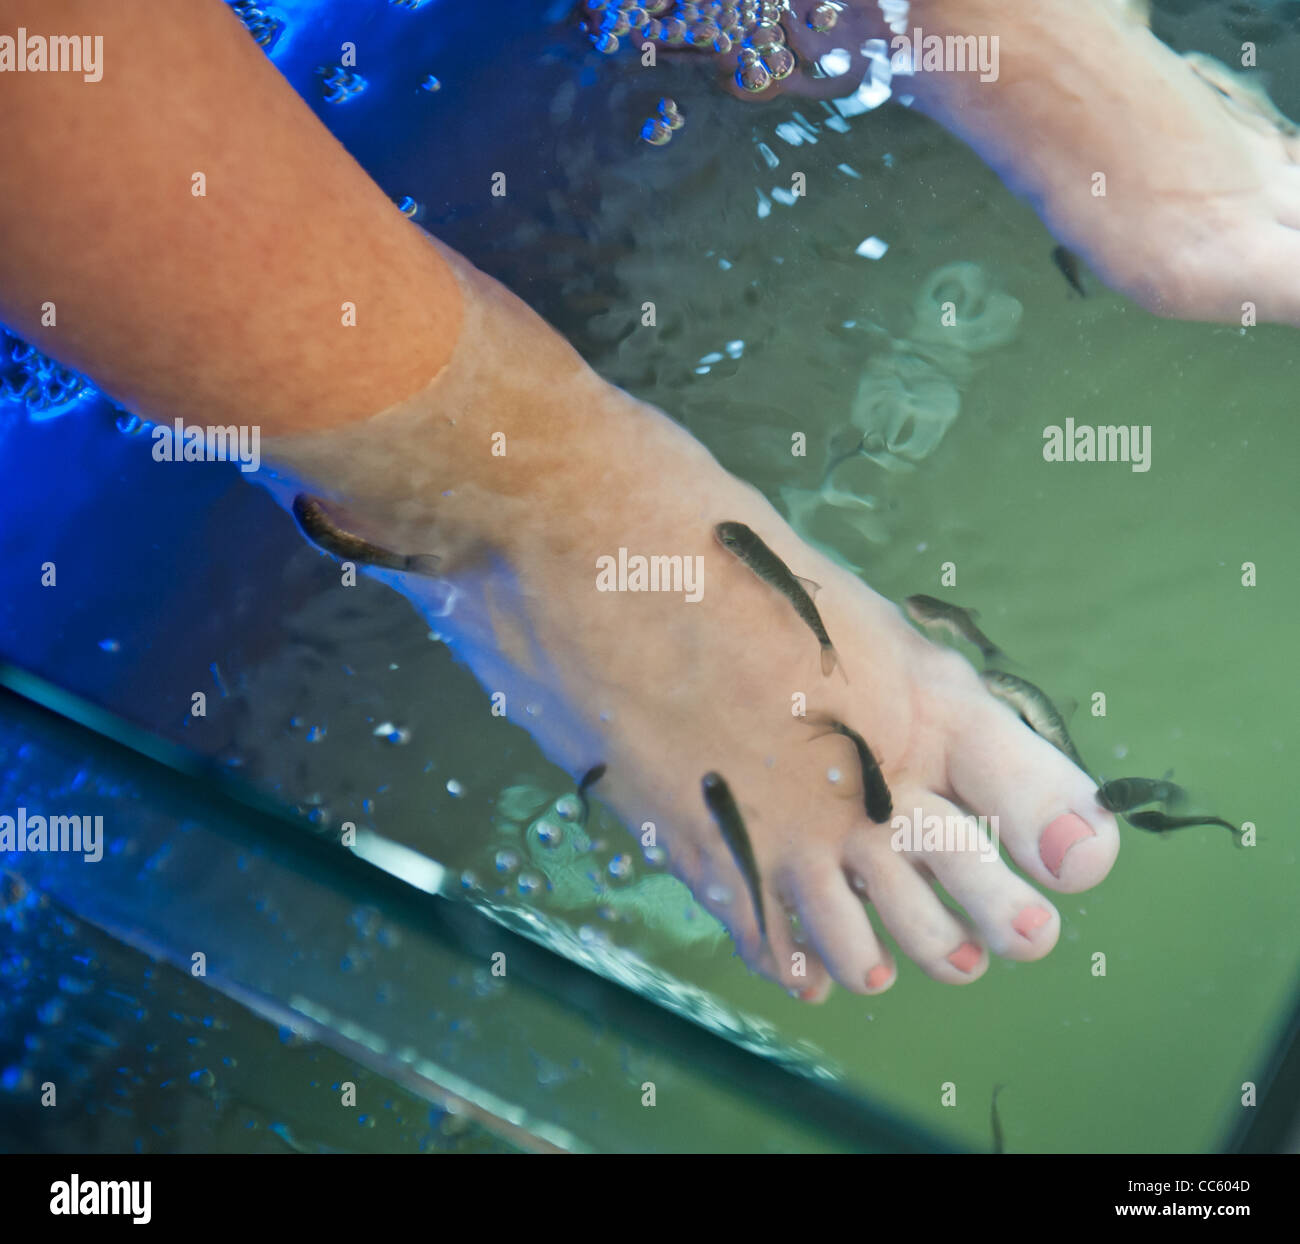 the nibble fish in water at a spa also known as the Garra Rufa fish Stock Photo